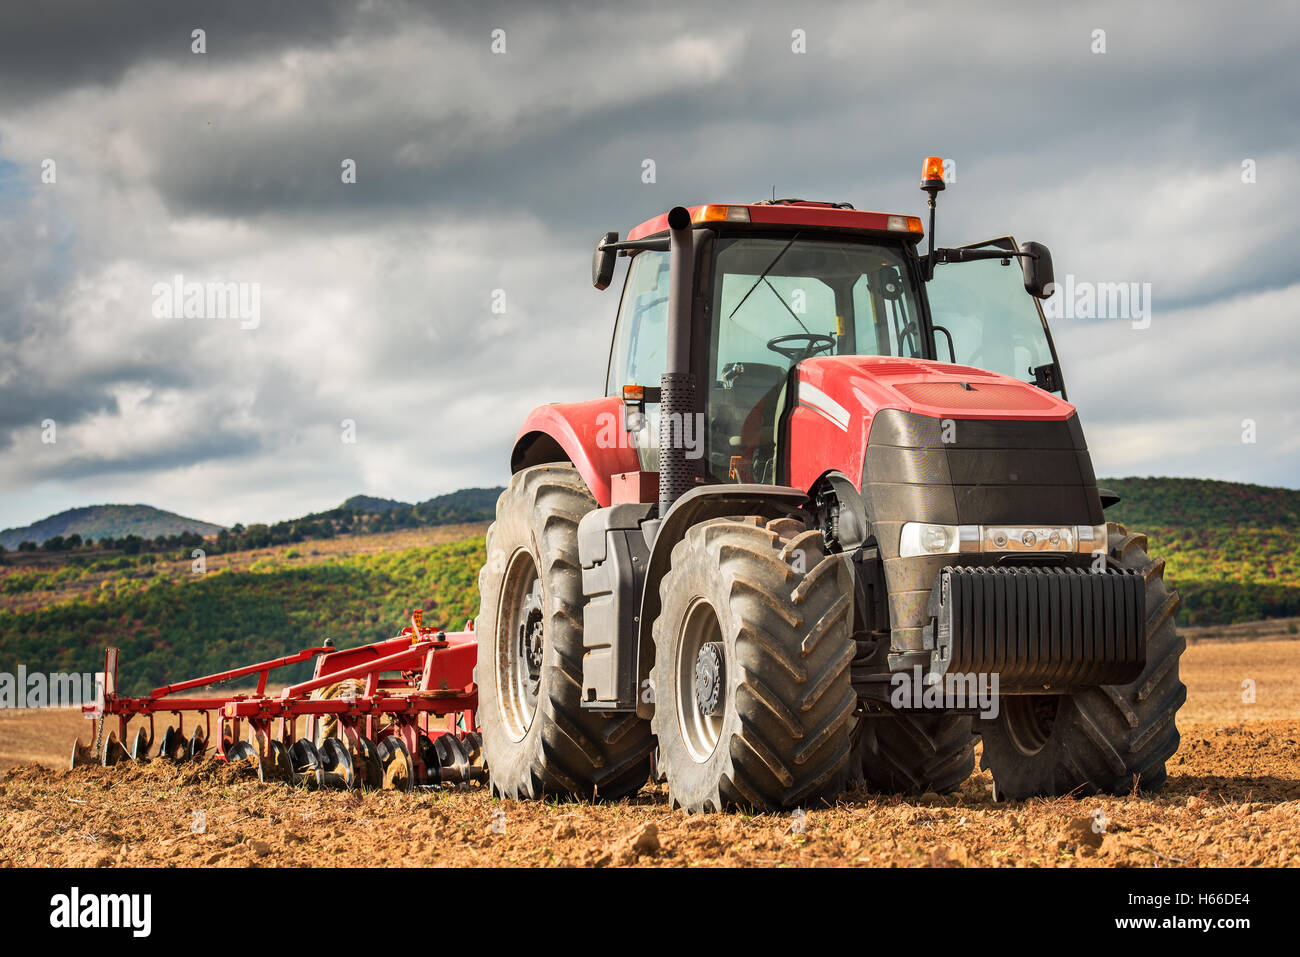 Karlovo, Bulgaria - Octomber 21, 2016: Case IH Puma 1260 agricultural tractor on display. Case IH wins two gold medals at AGROTE Stock Photo